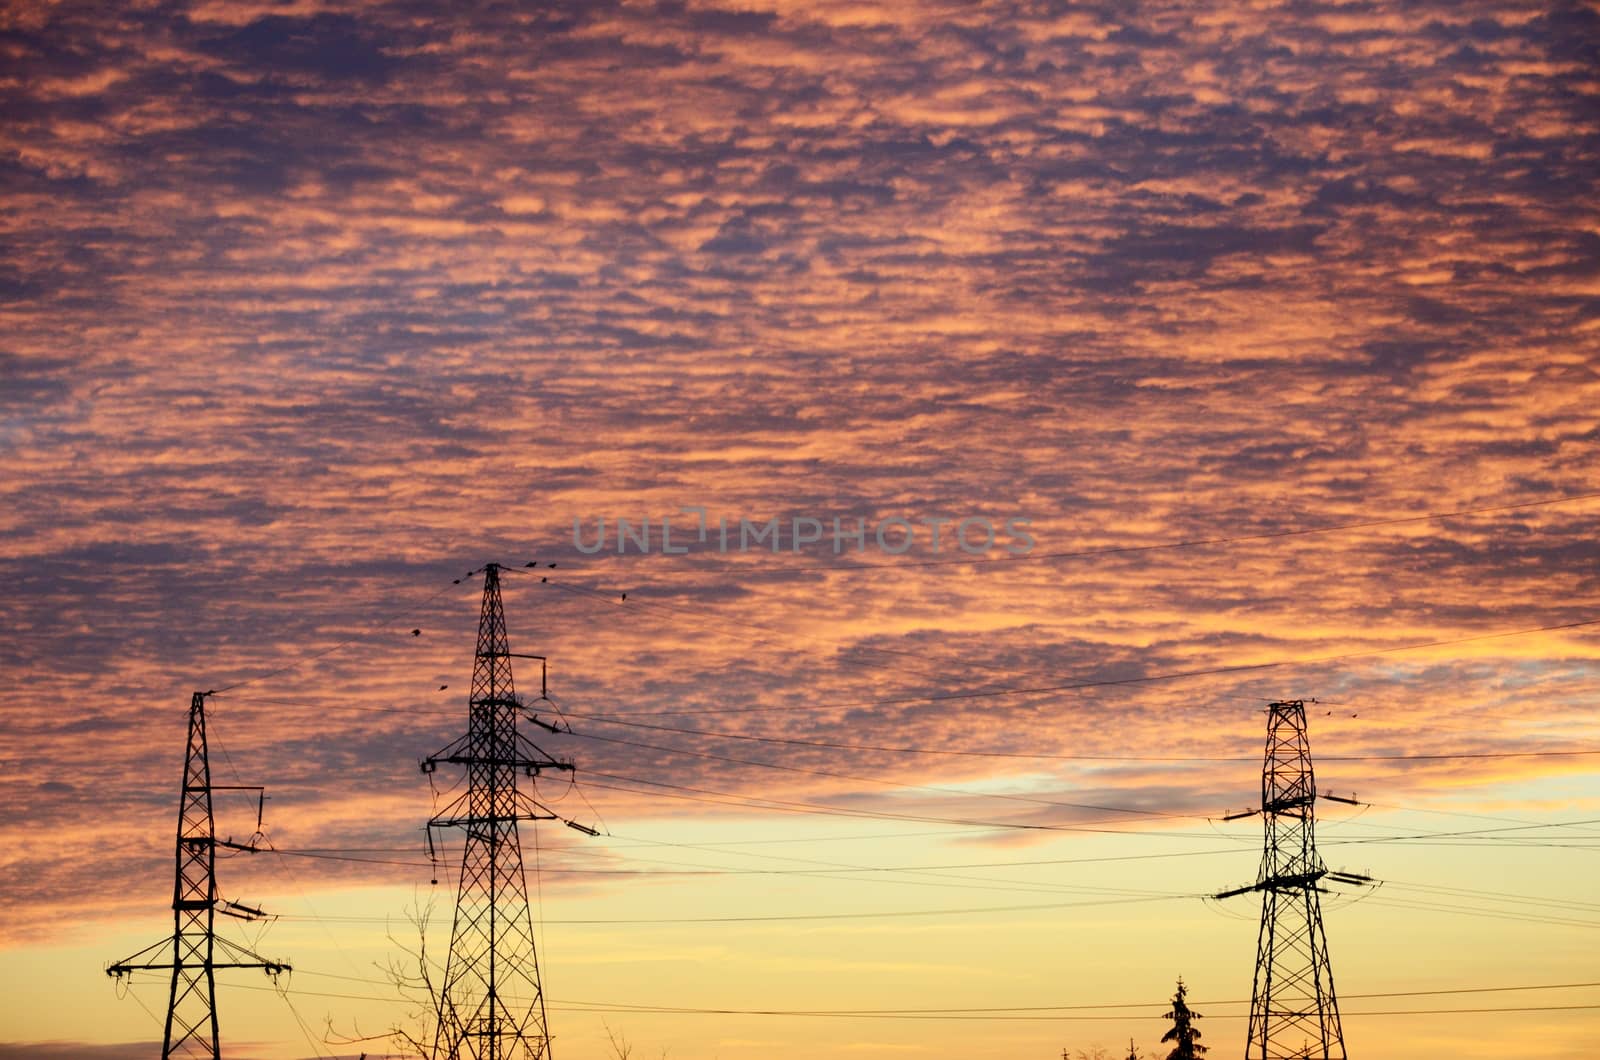 Dawn, sunrise with purple and orange sky, clouds. Skyscape with electric poles and cables.